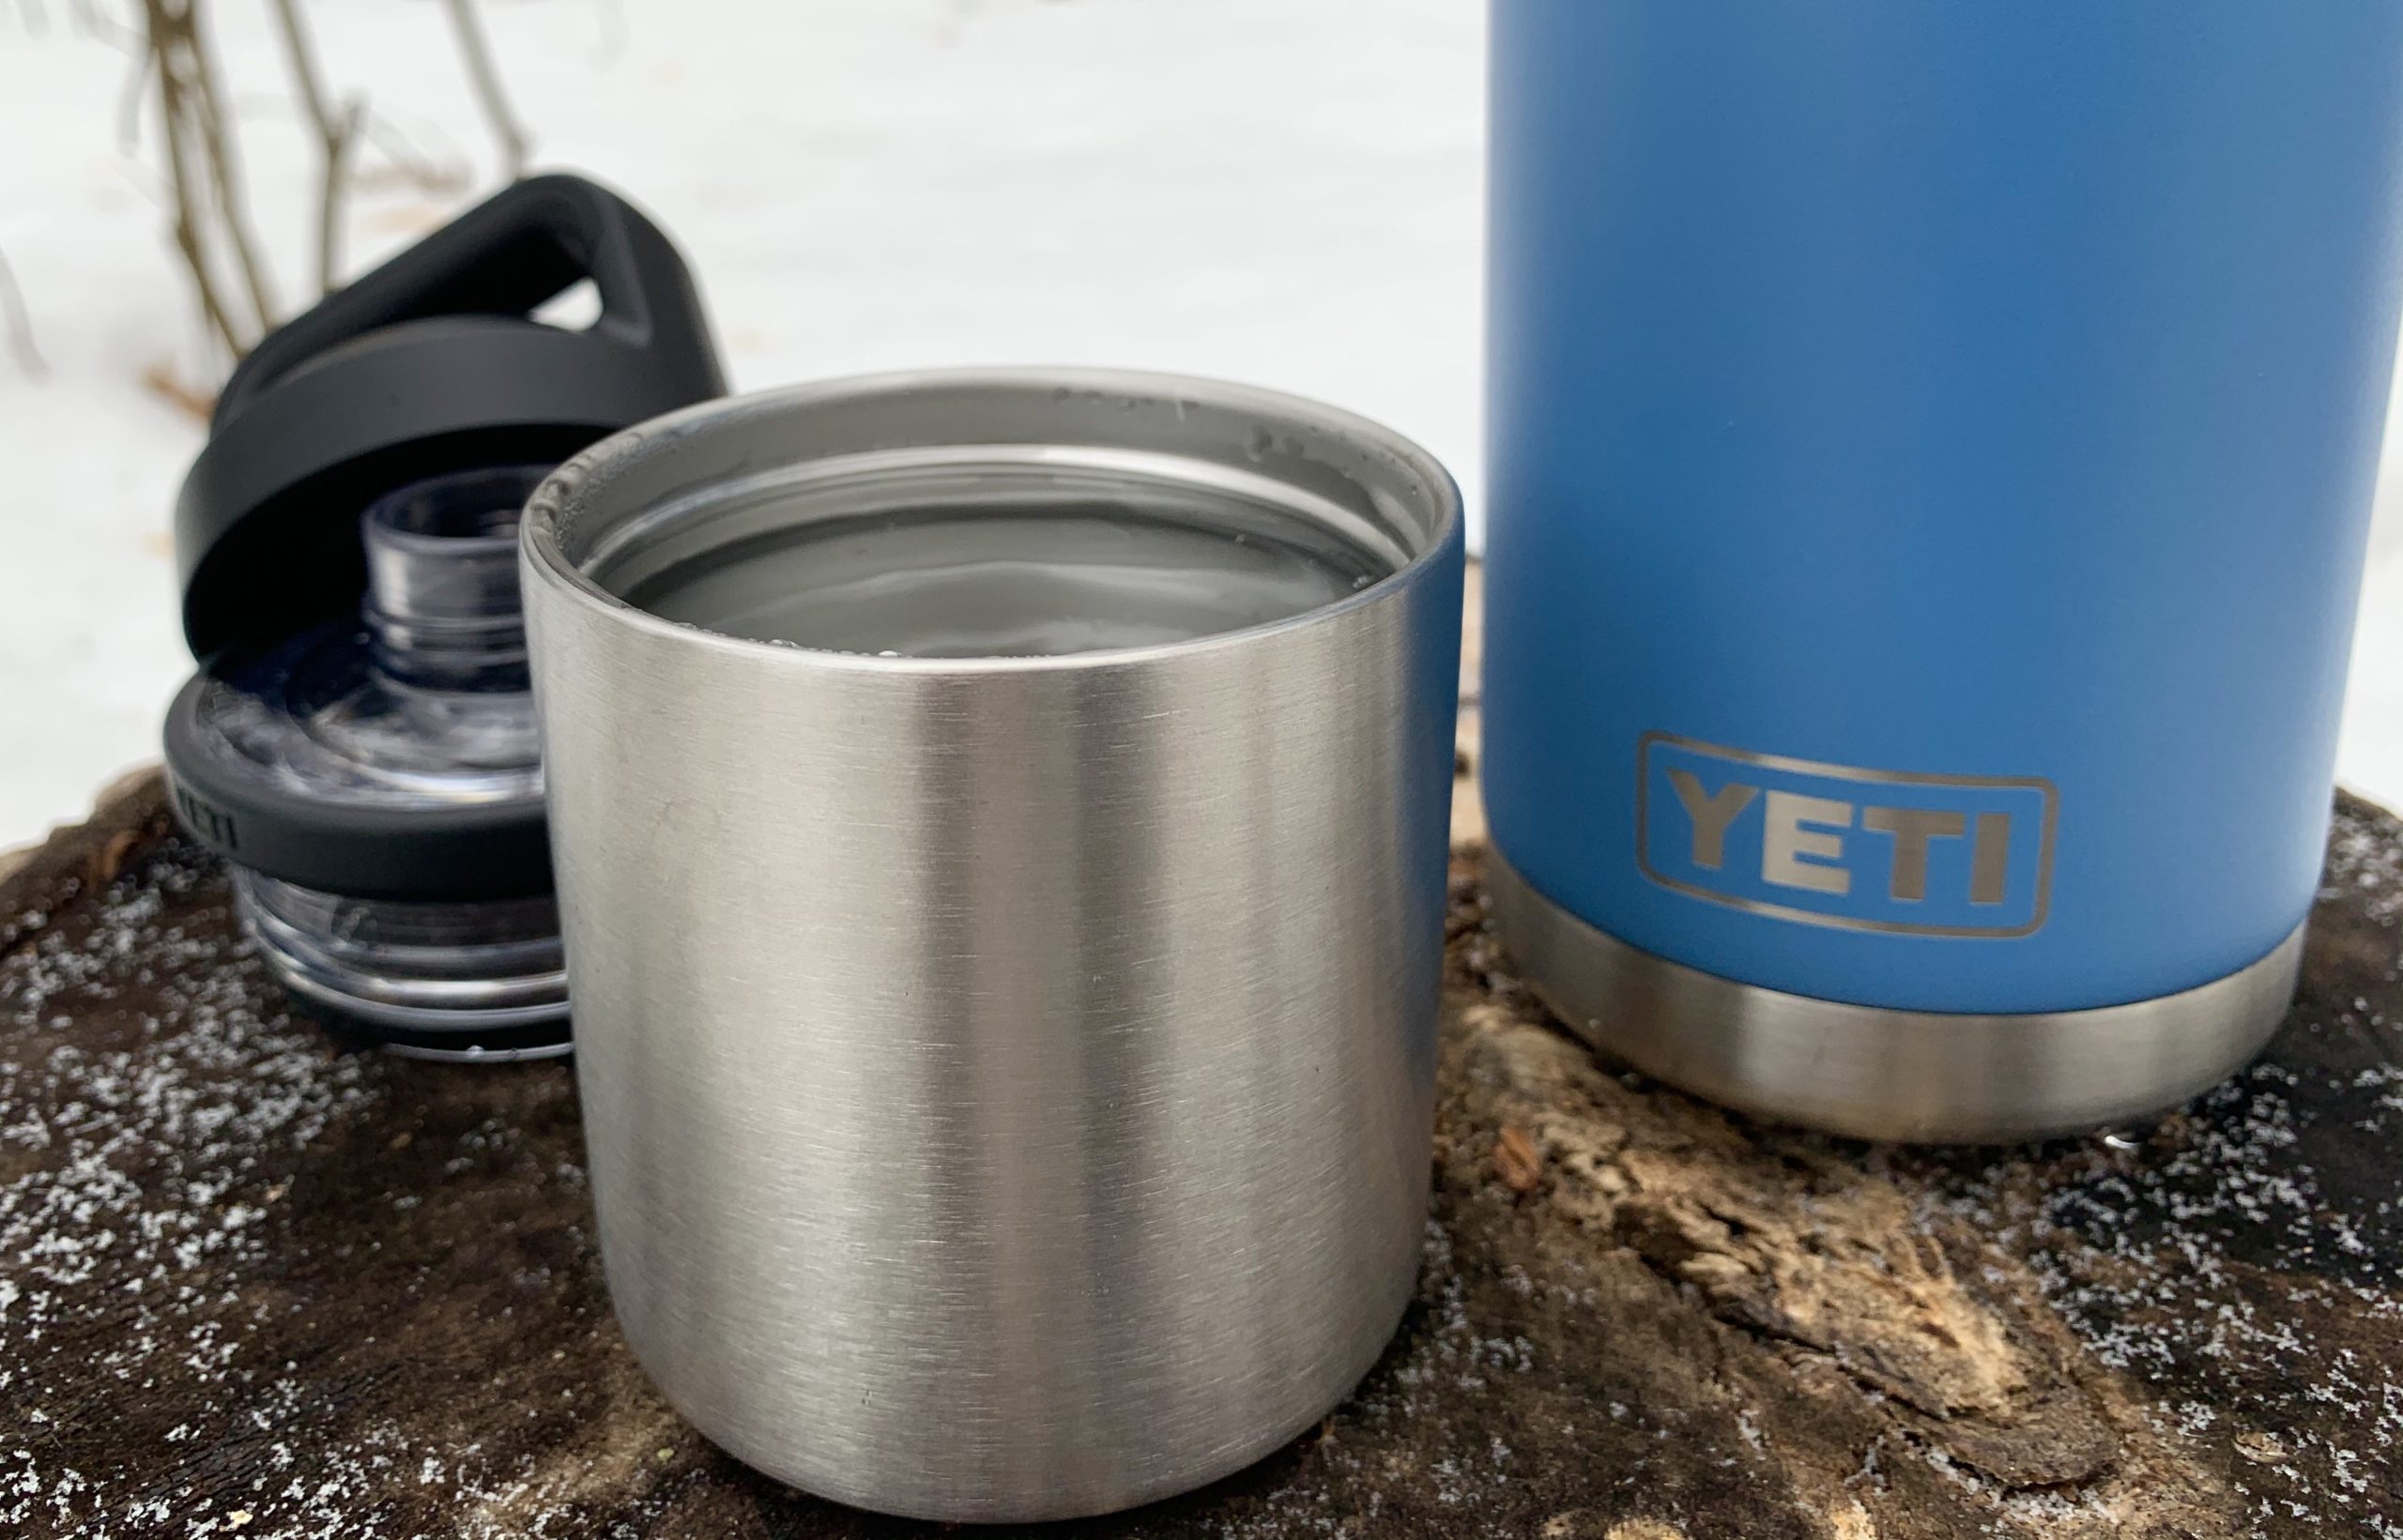 Which YETI Lid is the Best? (Updated for 2023)